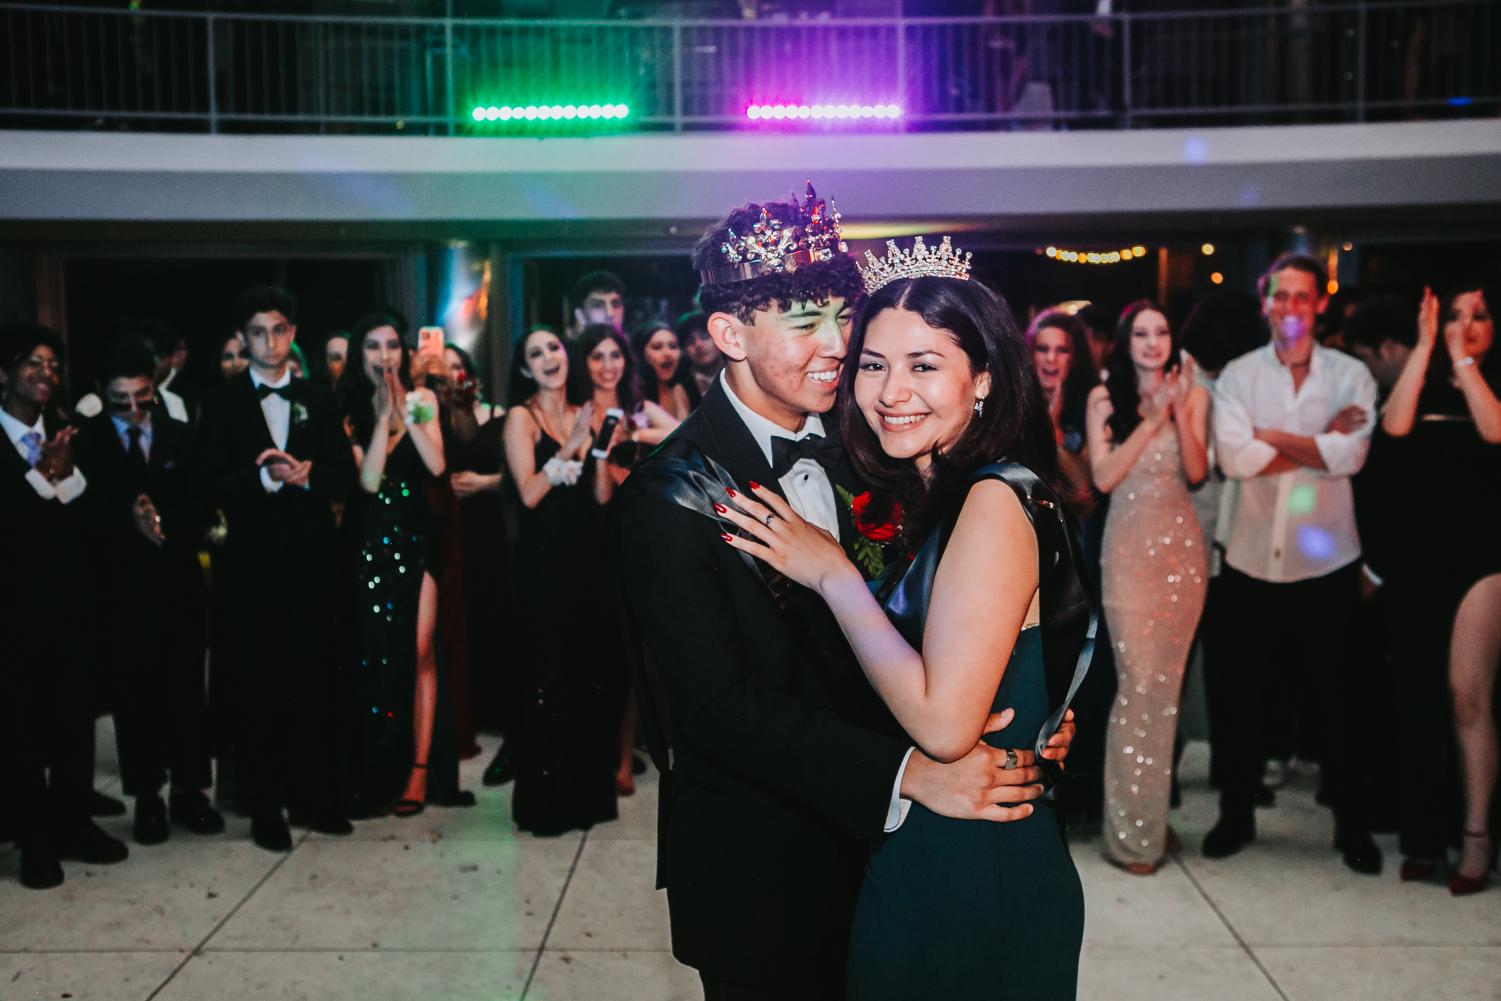 The Prom King and Queen, dancing to the tune of “Can I Have This Dance” from High School Musical.